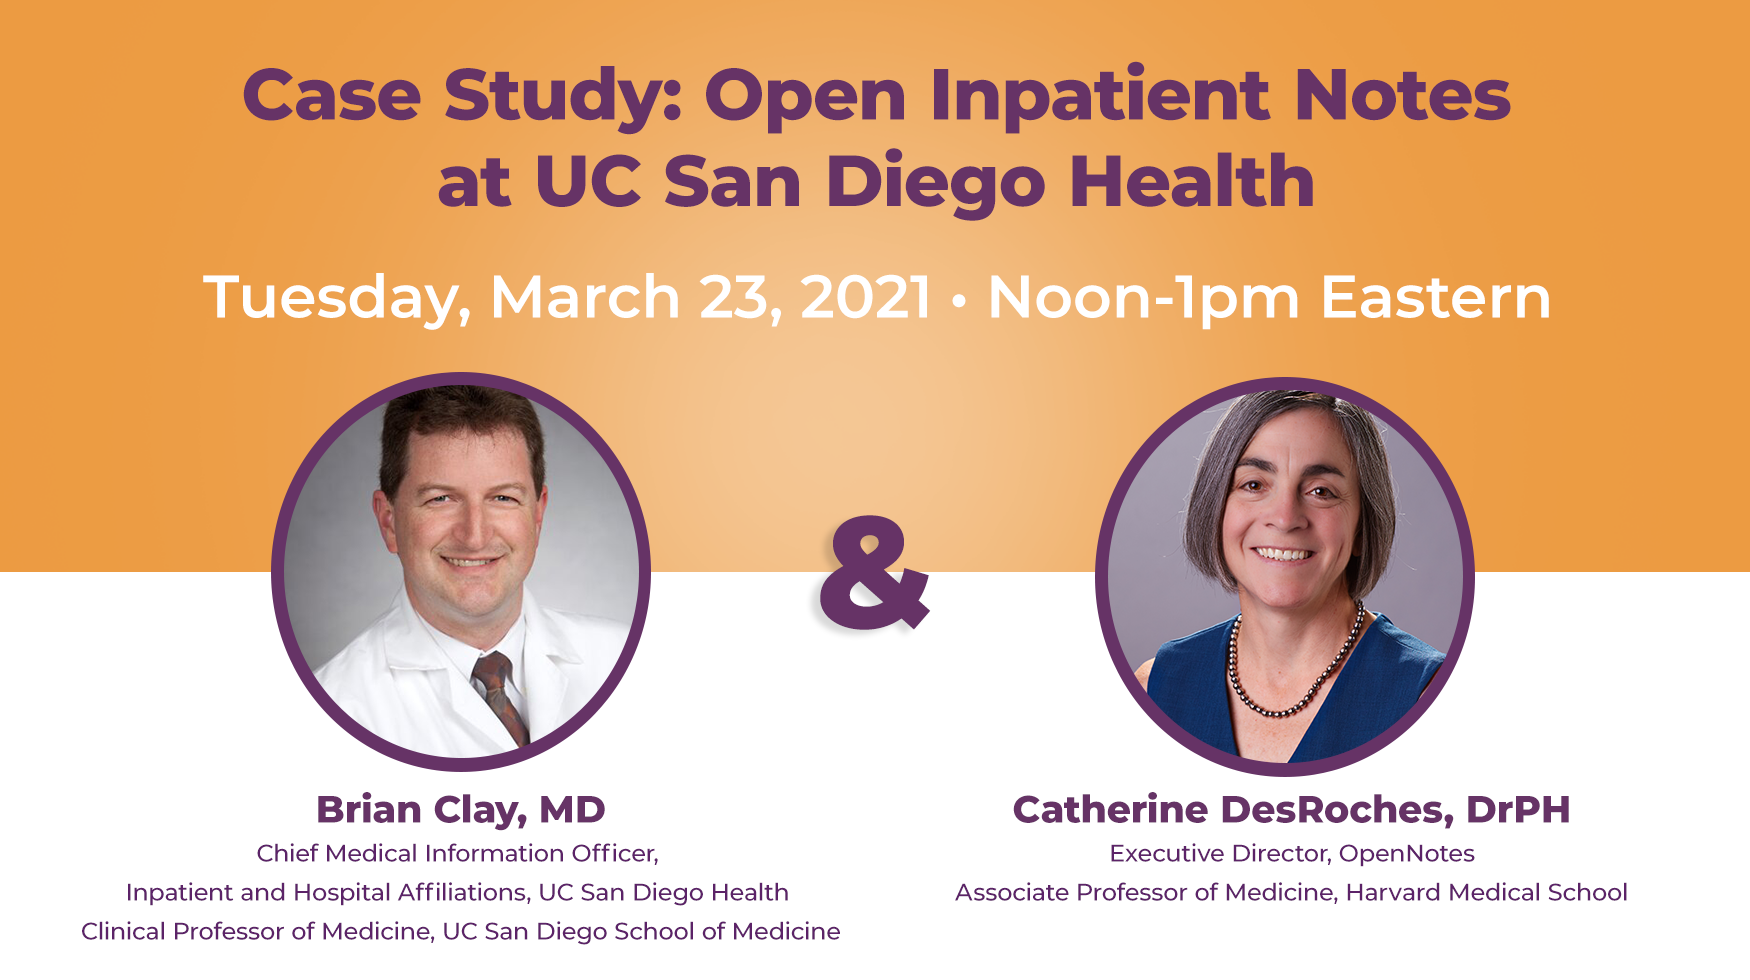 Open Inpatient Notes at UC San Diego Health